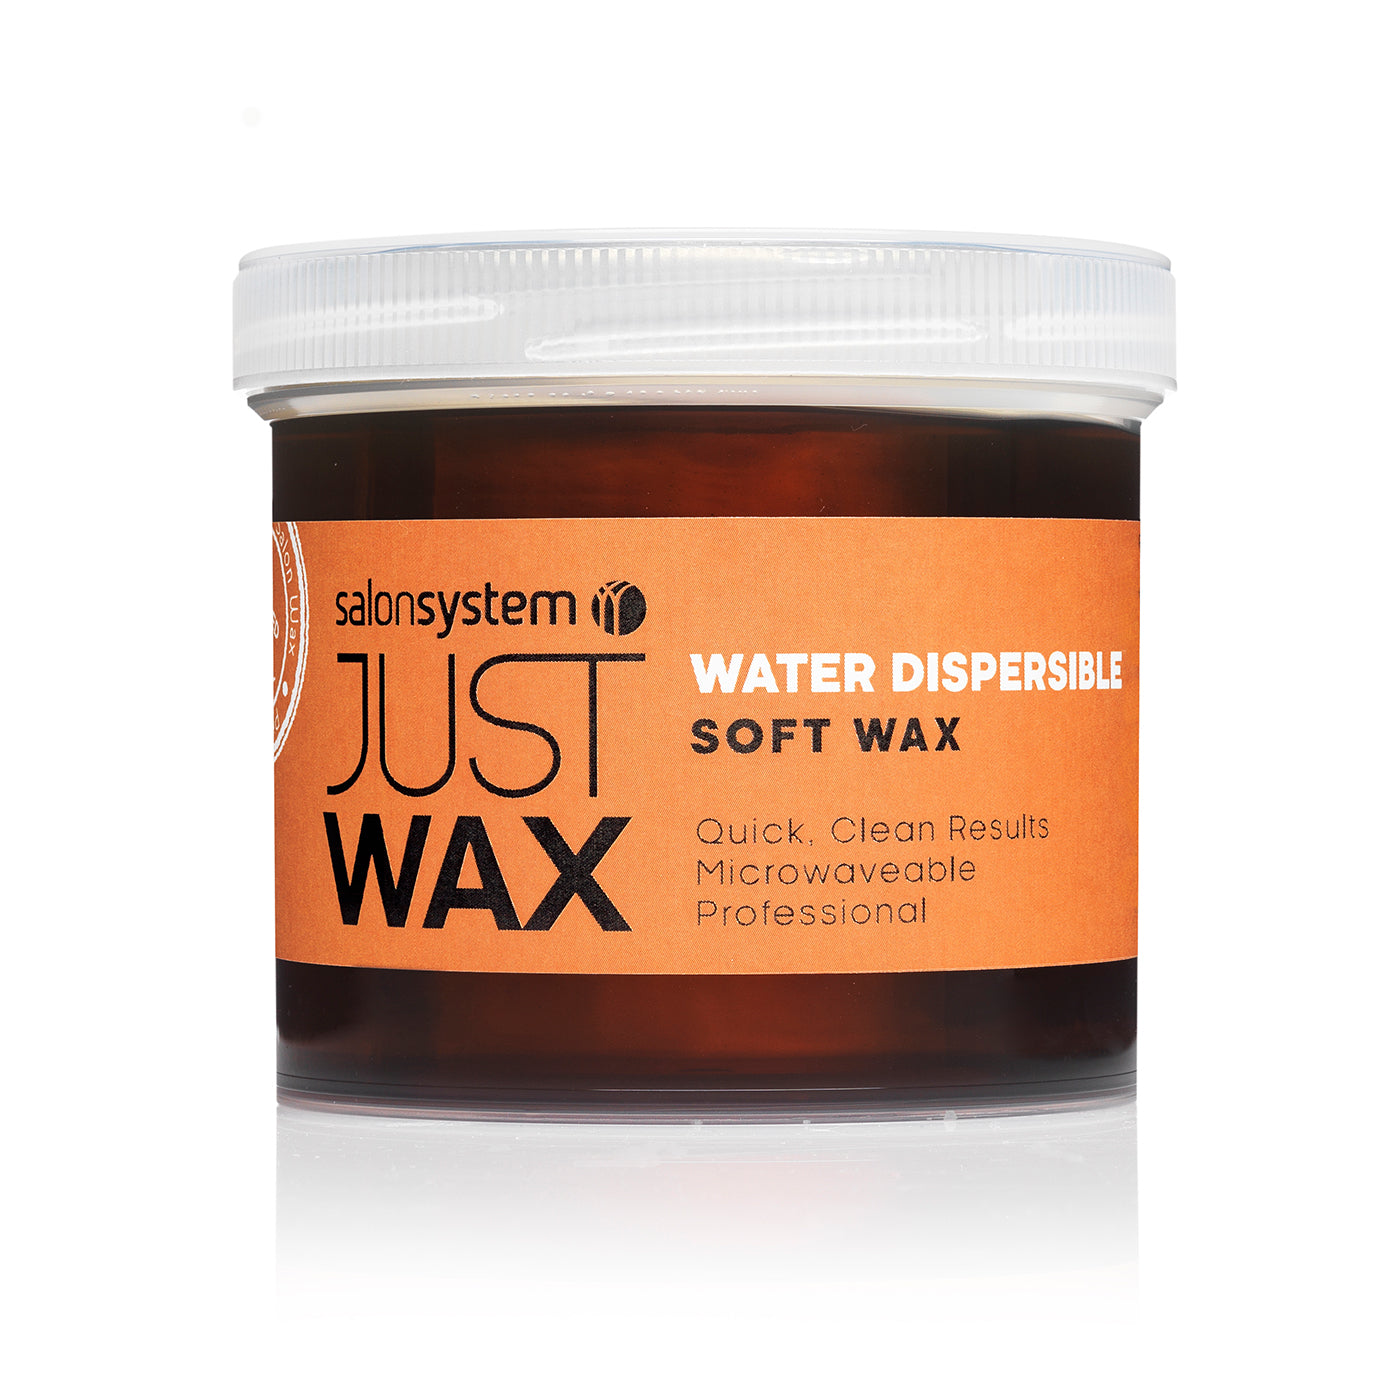 Just Wax Water Dispersible Soft Wax (450g) - Ultimate Hair and Beauty